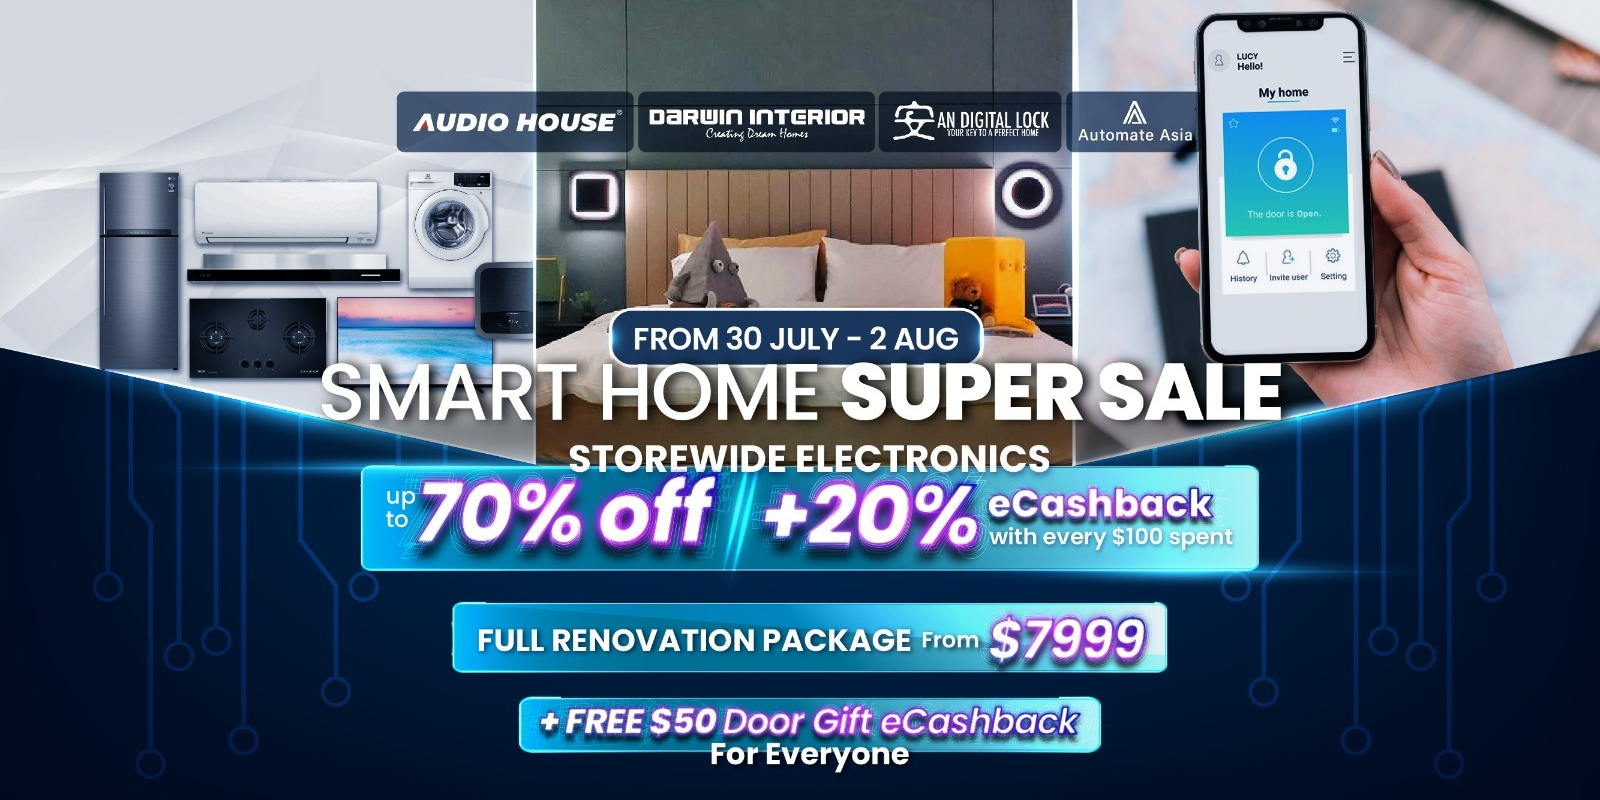 [Audio House Smart Home Super Sale] Up to 70% OFF Storewide + 20% eCashback with Every $100 Spent +